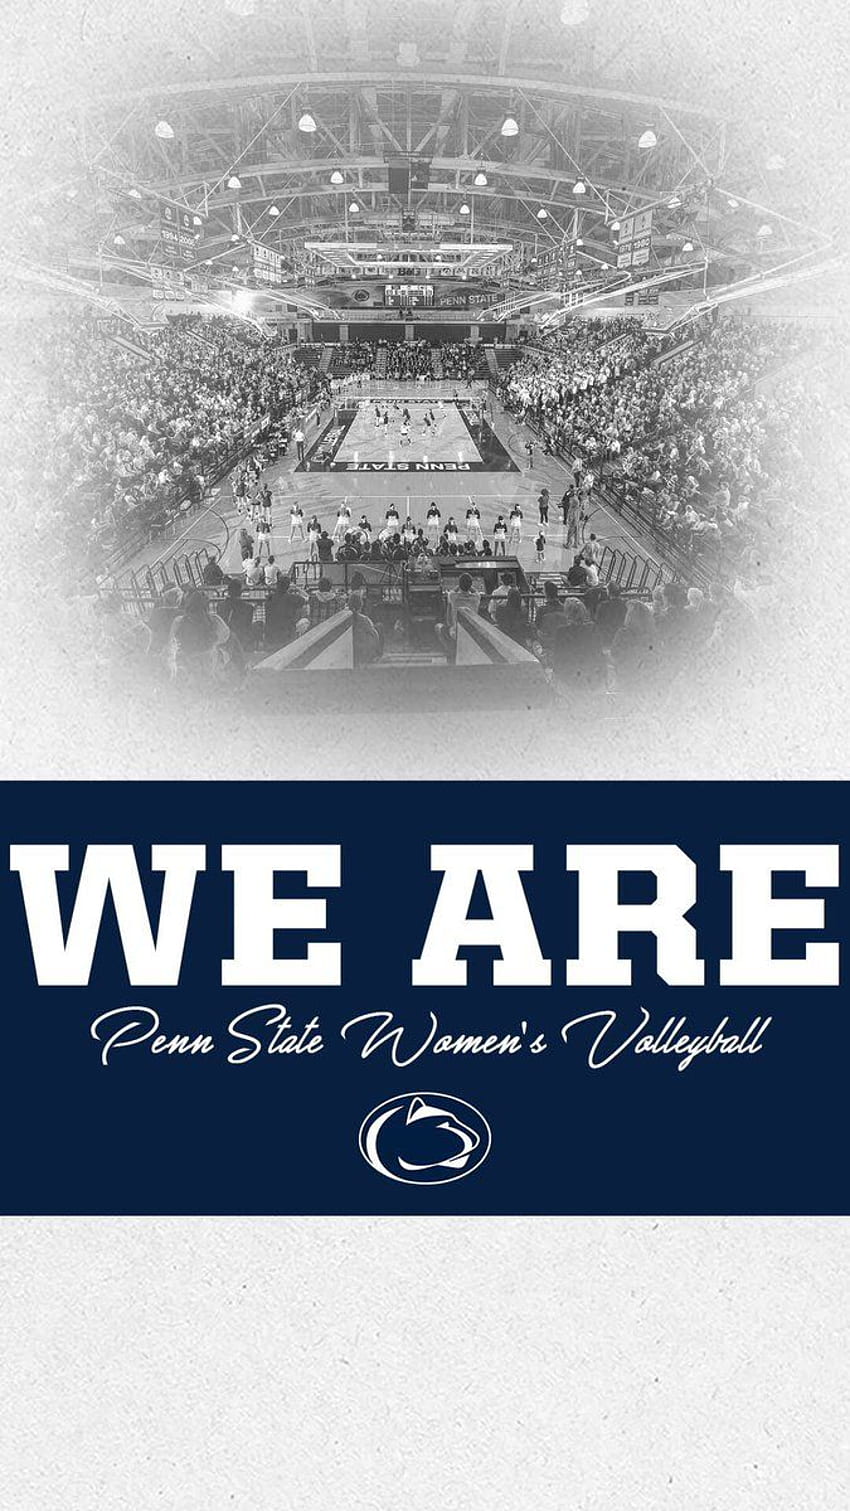 Penn State Women's Volleyball - Need a new HD phone wallpaper